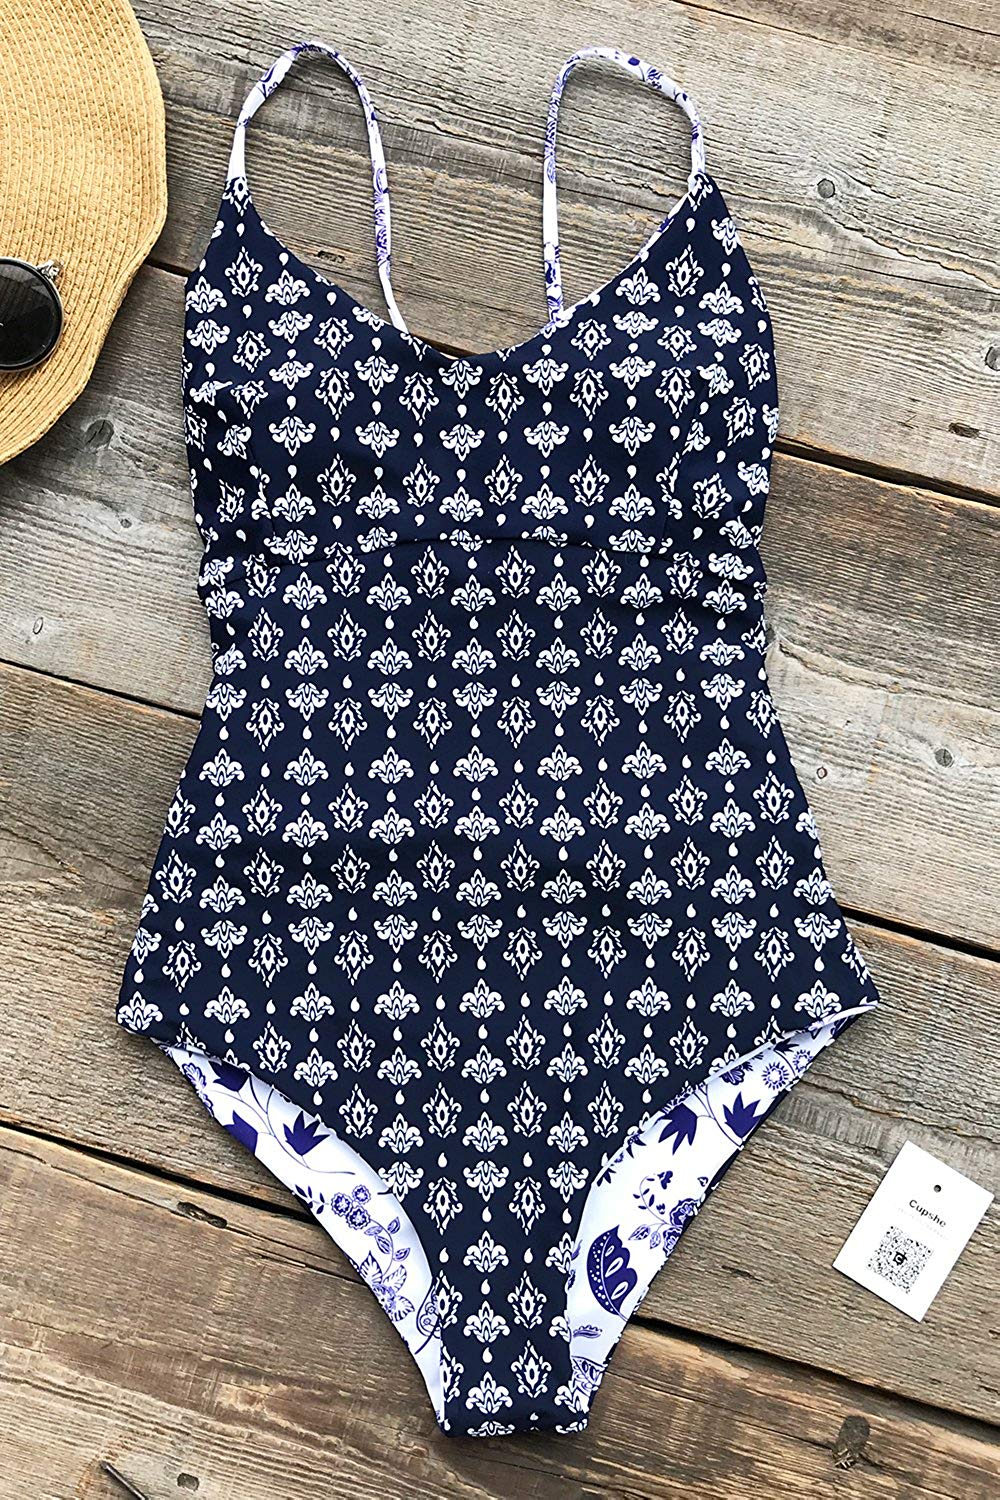 Cupshe Fashion Light Up The Night Print One-Piece Swimsuit, White, Size ...